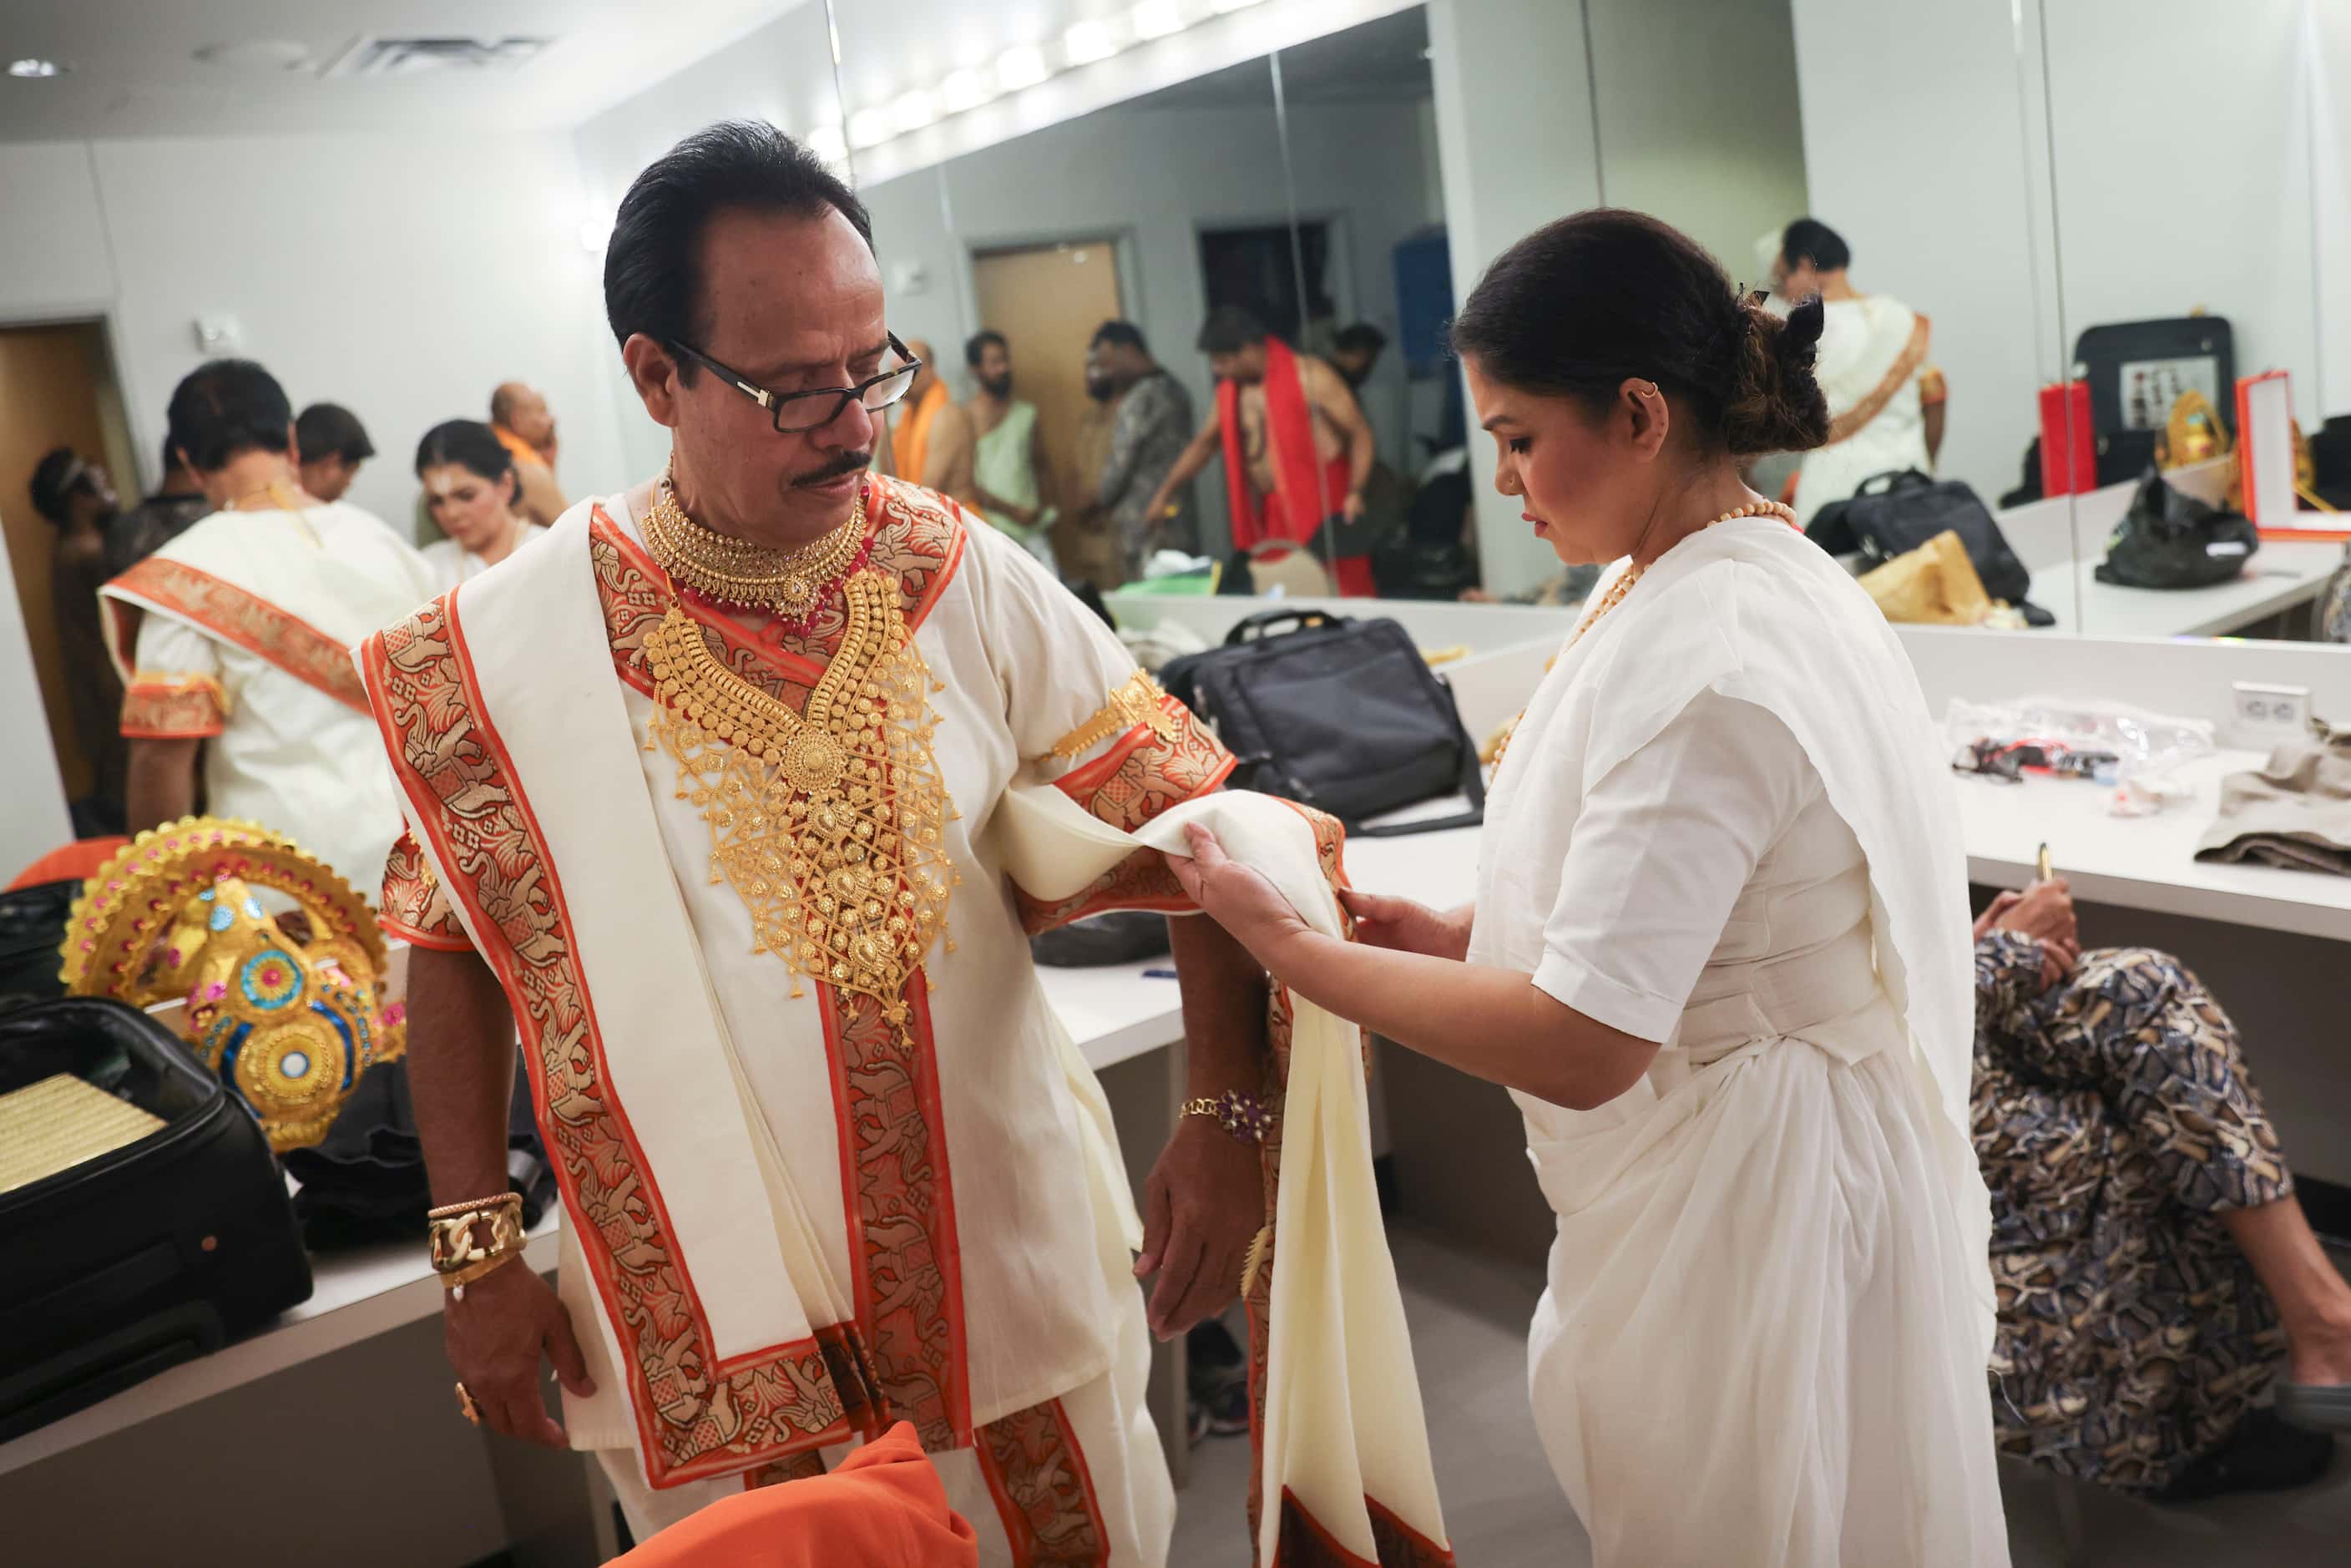 Cast members Md Mohiuddin, playing the role of Indra, get his outfit fixed in the dressing...